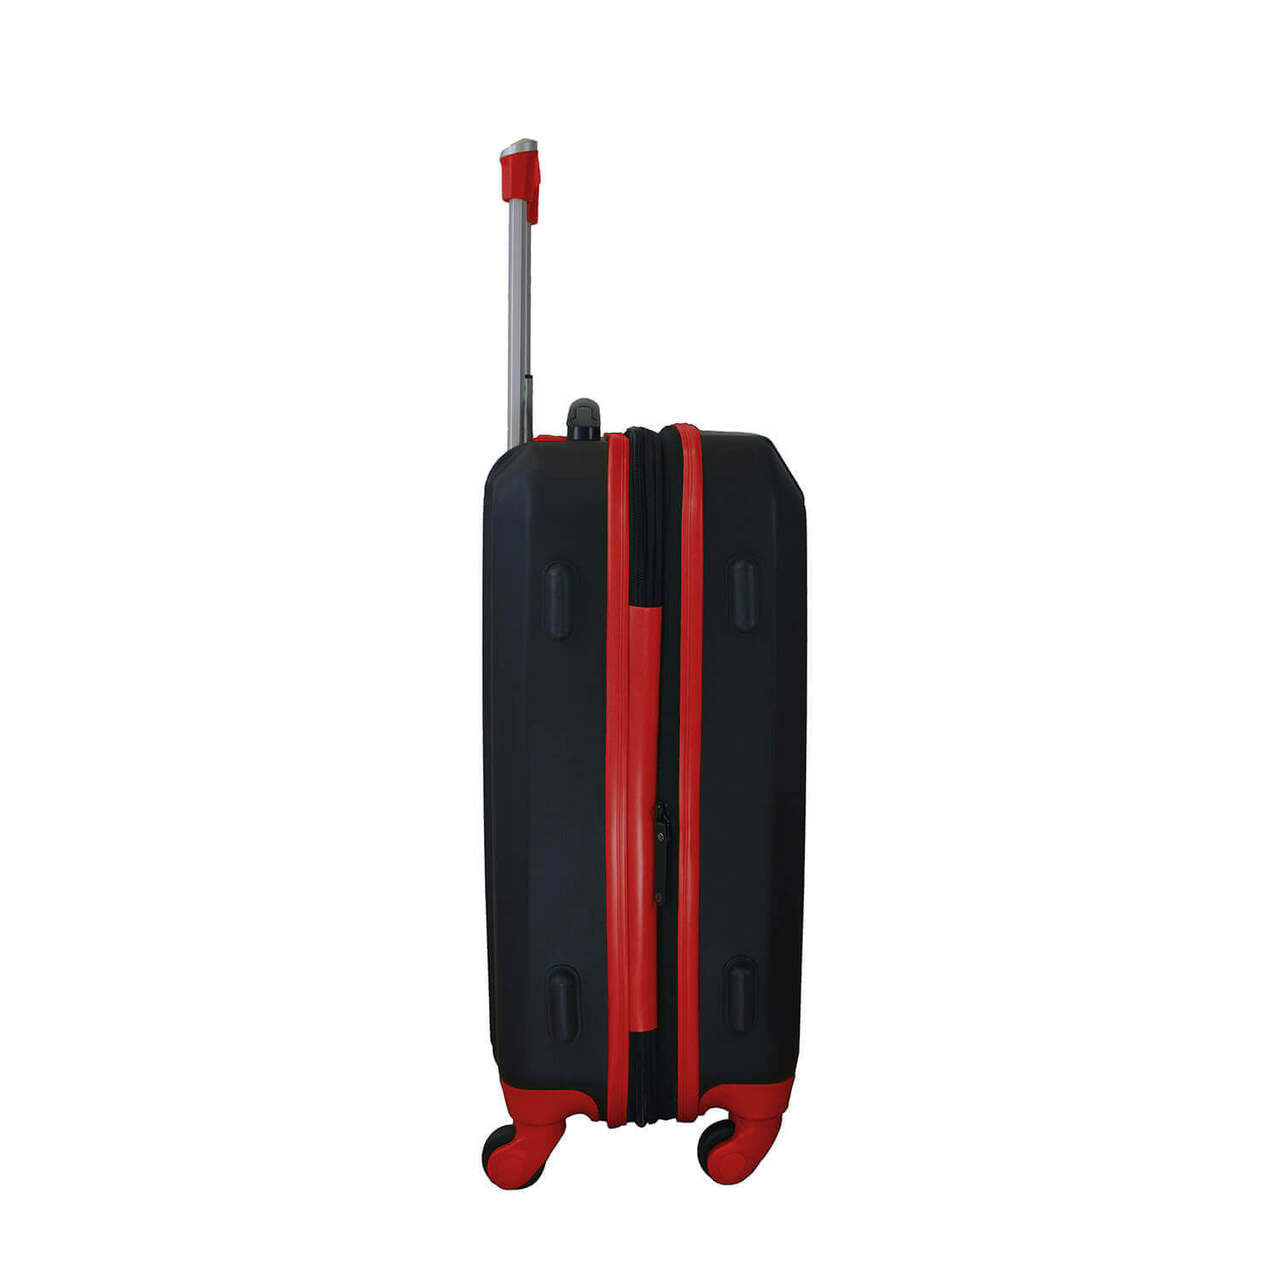 49ers Carry On Spinner Luggage | San Francisco 49ers Hardcase Two-Tone Luggage Carry-on Spinner in Red